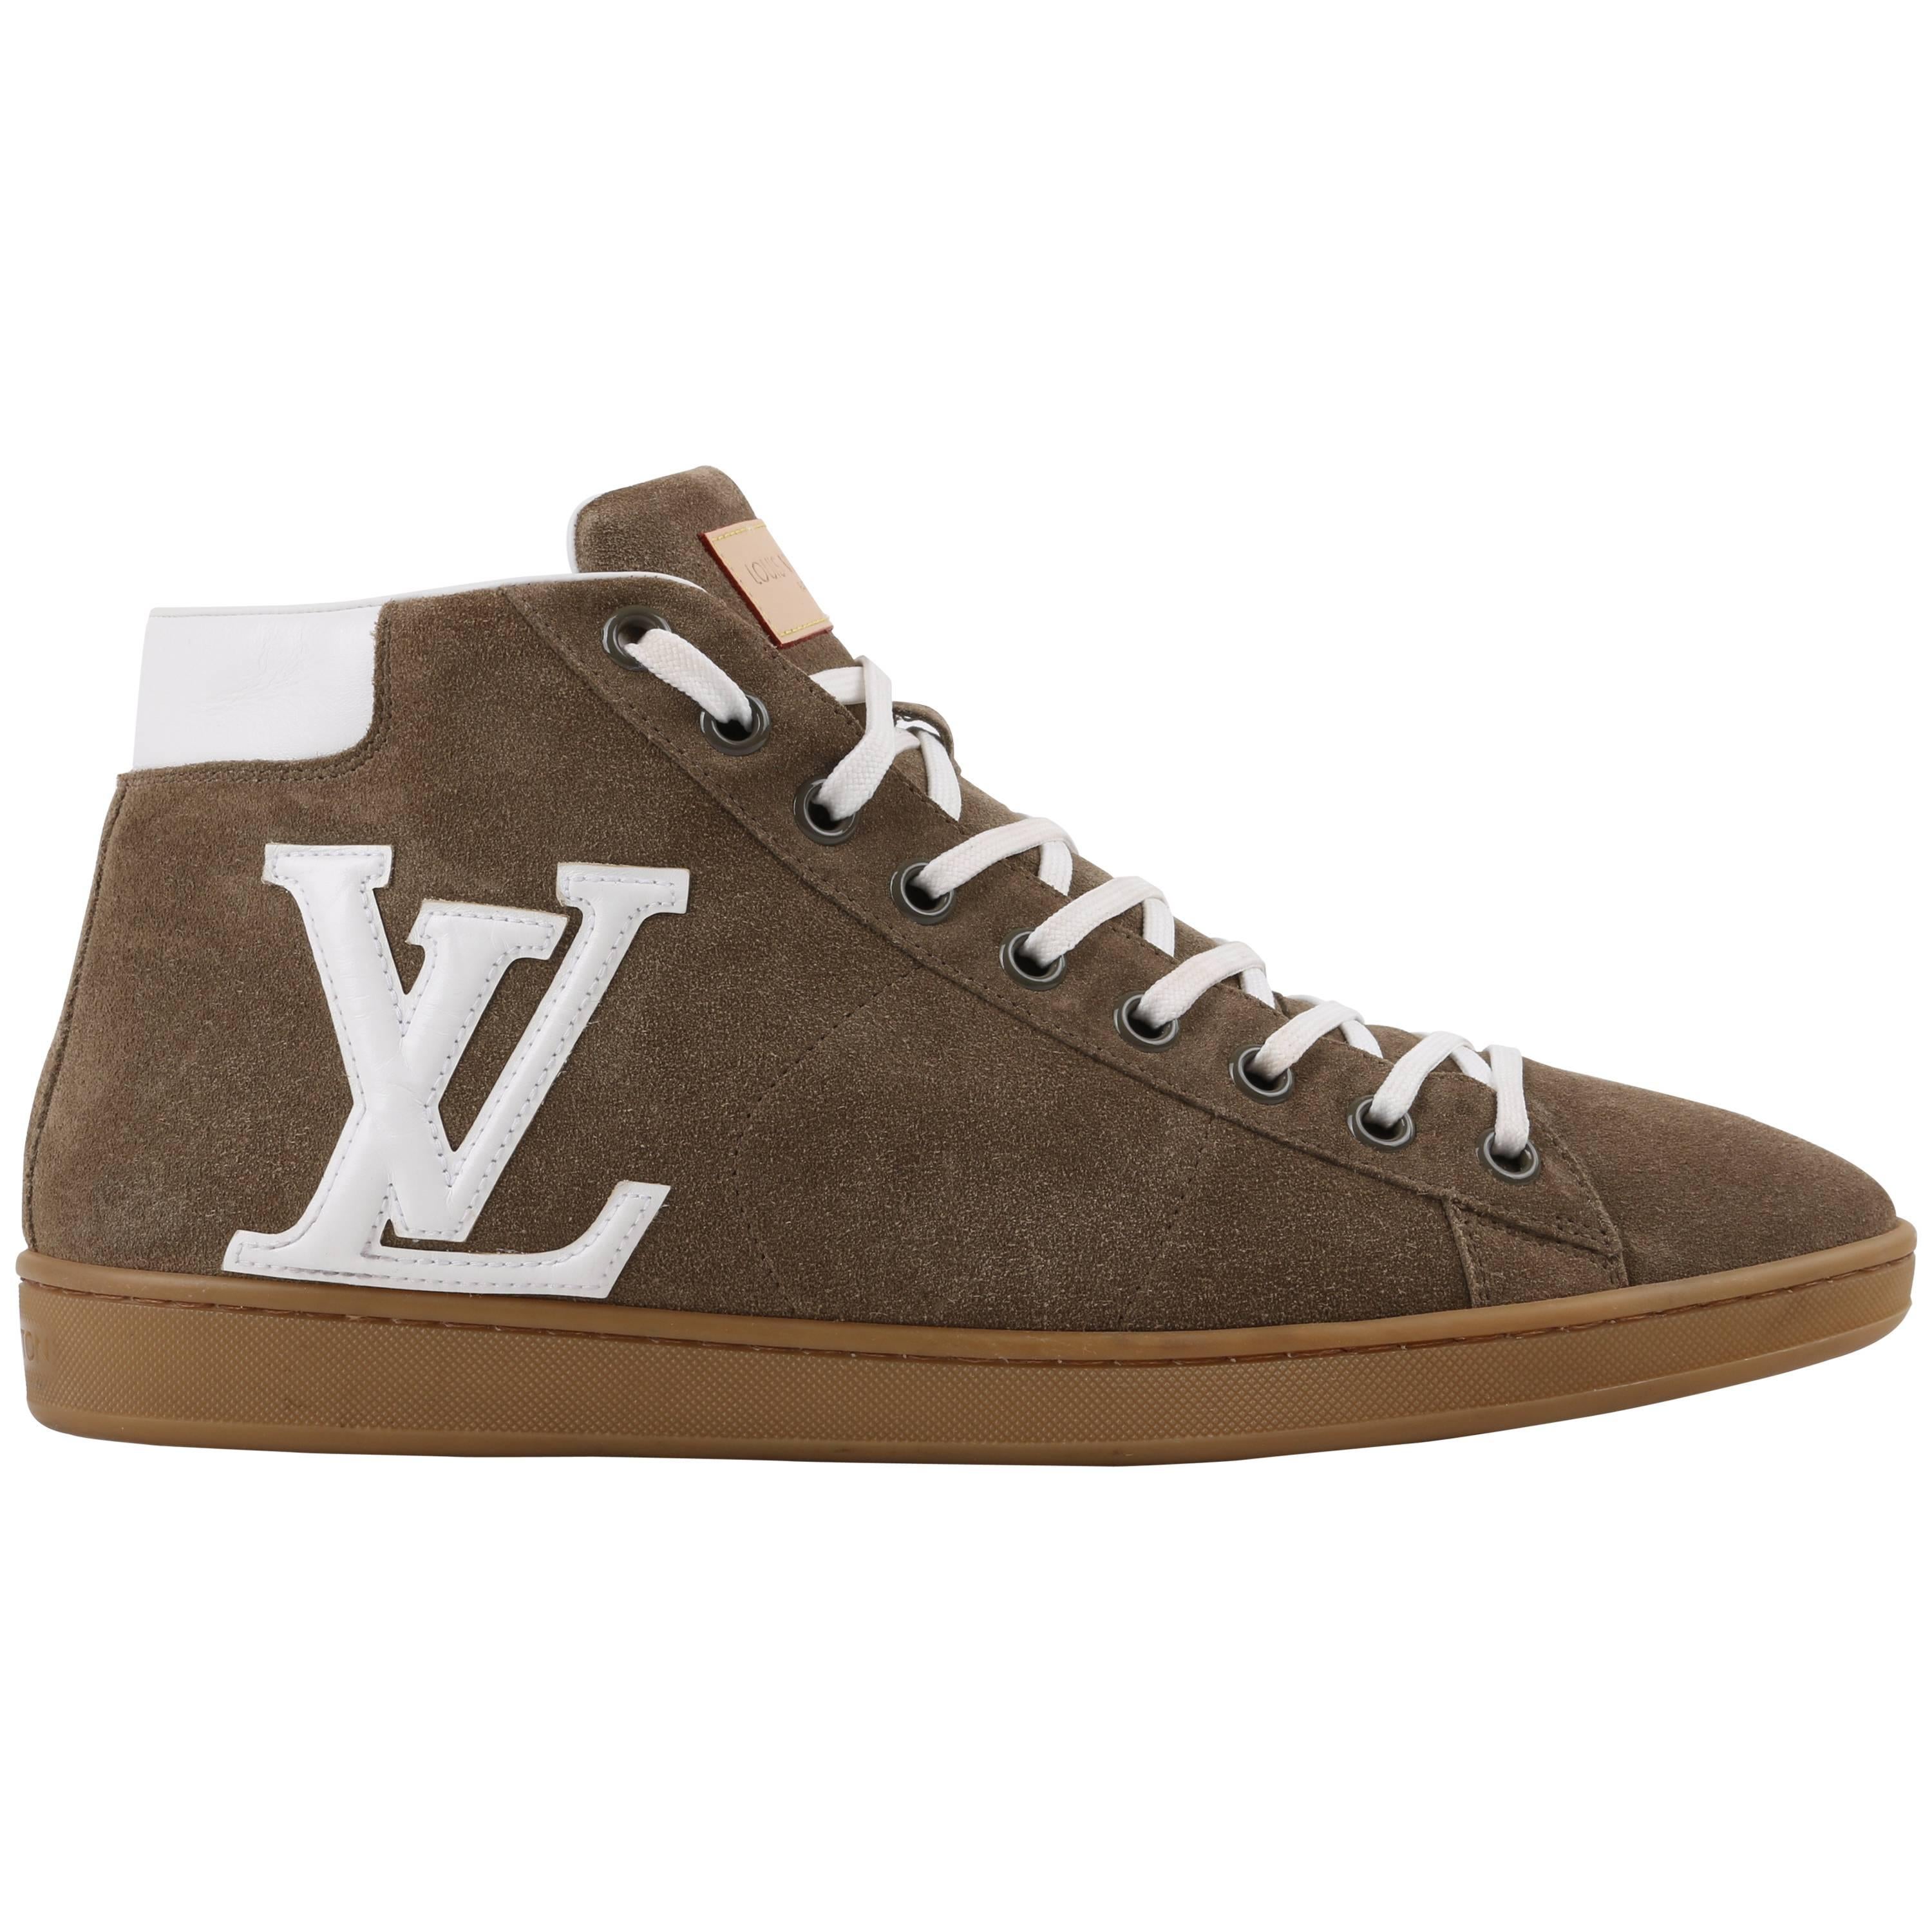 LOUIS VUITTON S/S 2012 Khaki Suede Leather LV High Top Surfside Sneaker  Boot